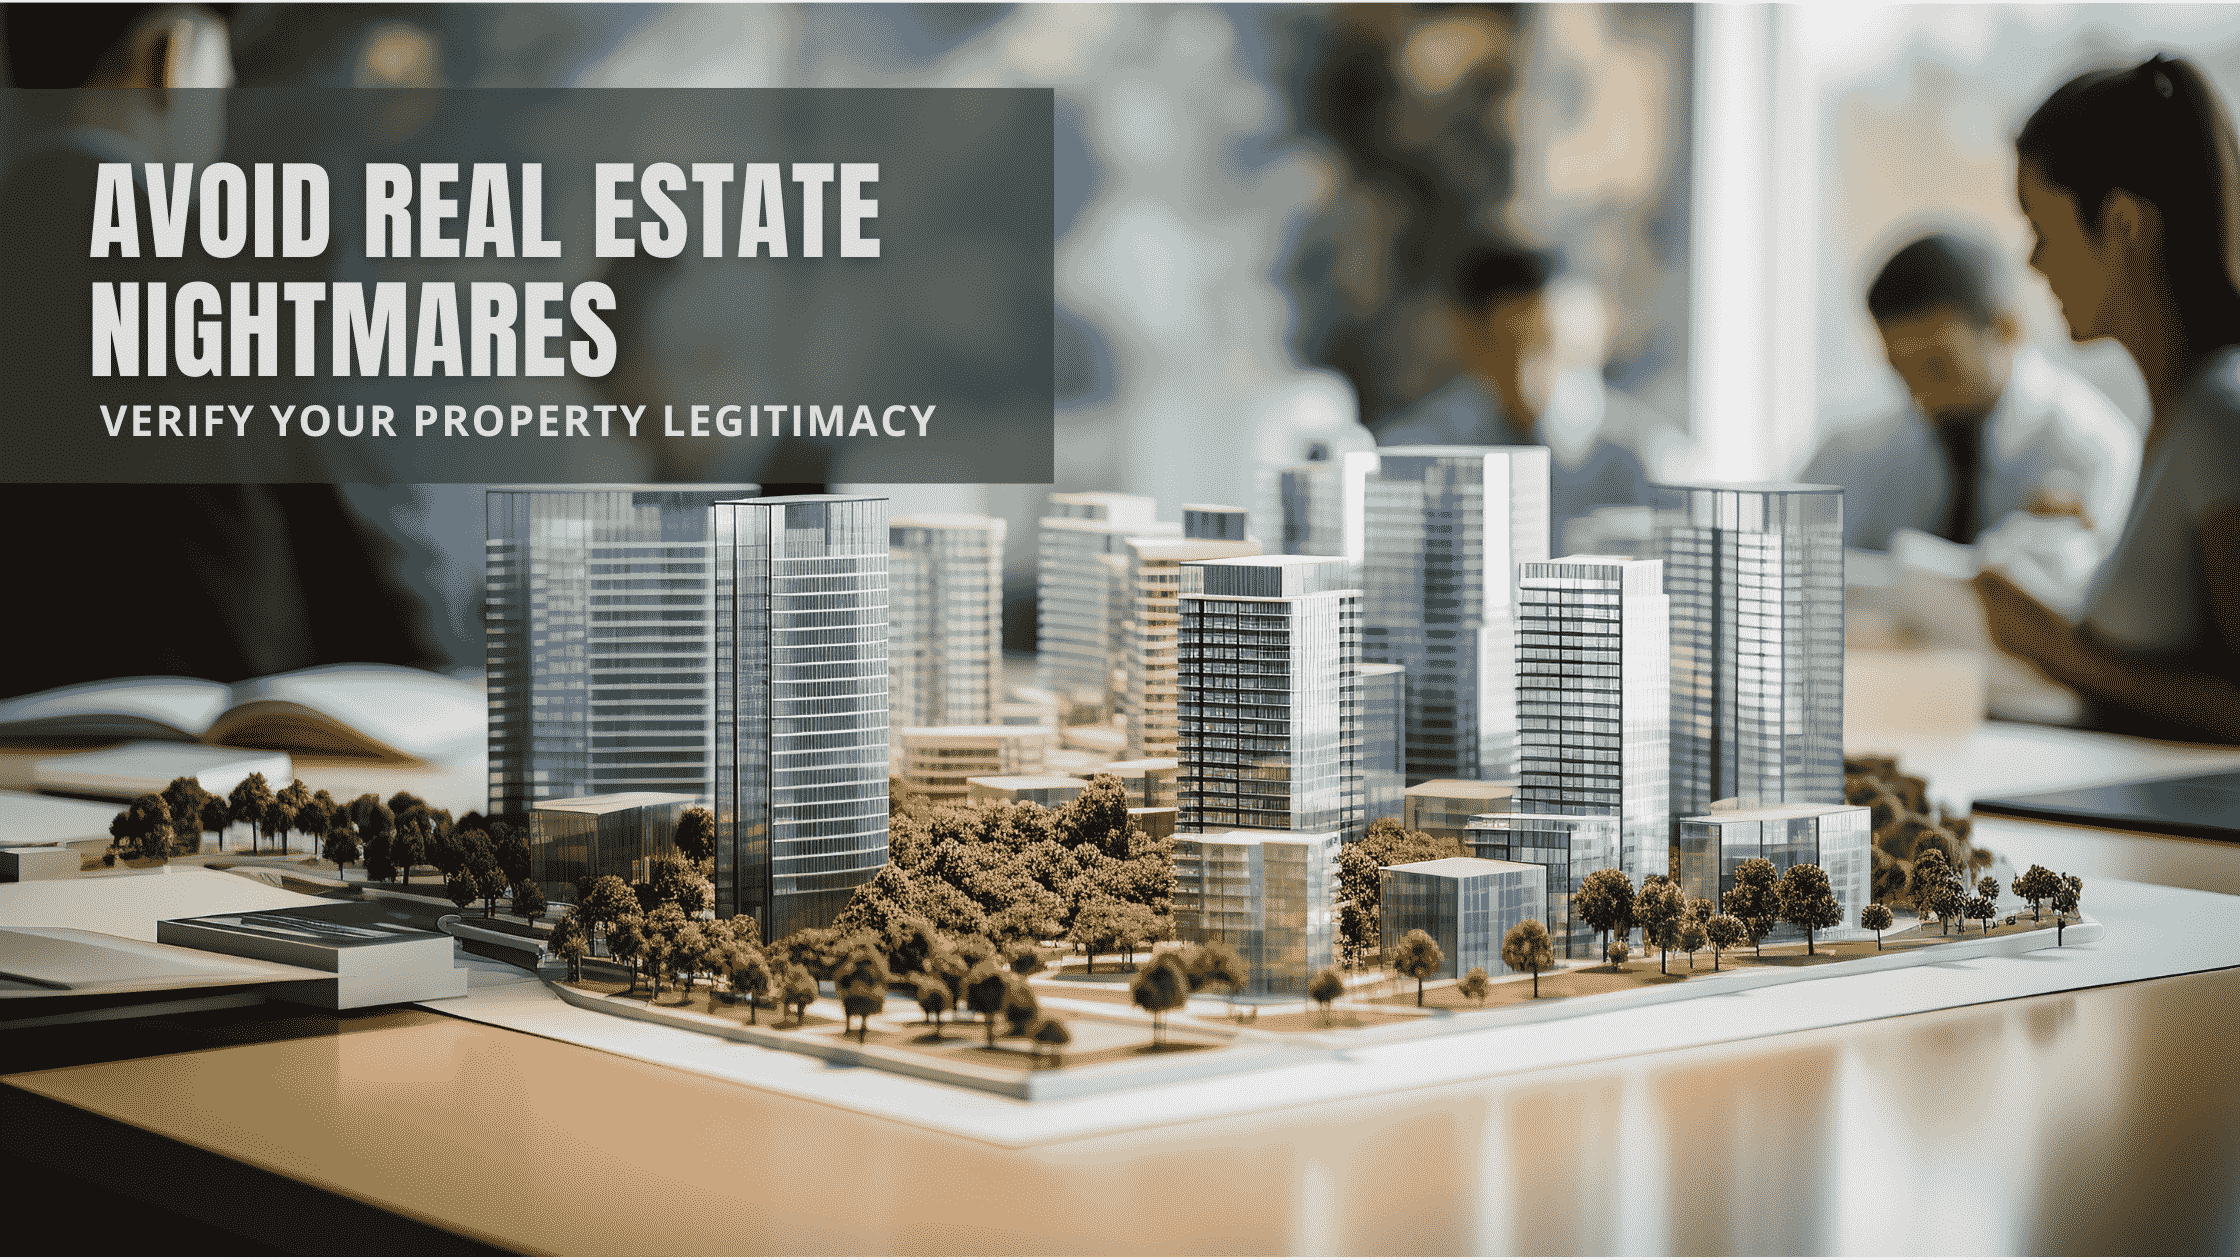 Is Your Property Legit? A Guide to Avoiding Real Estate Nightmares